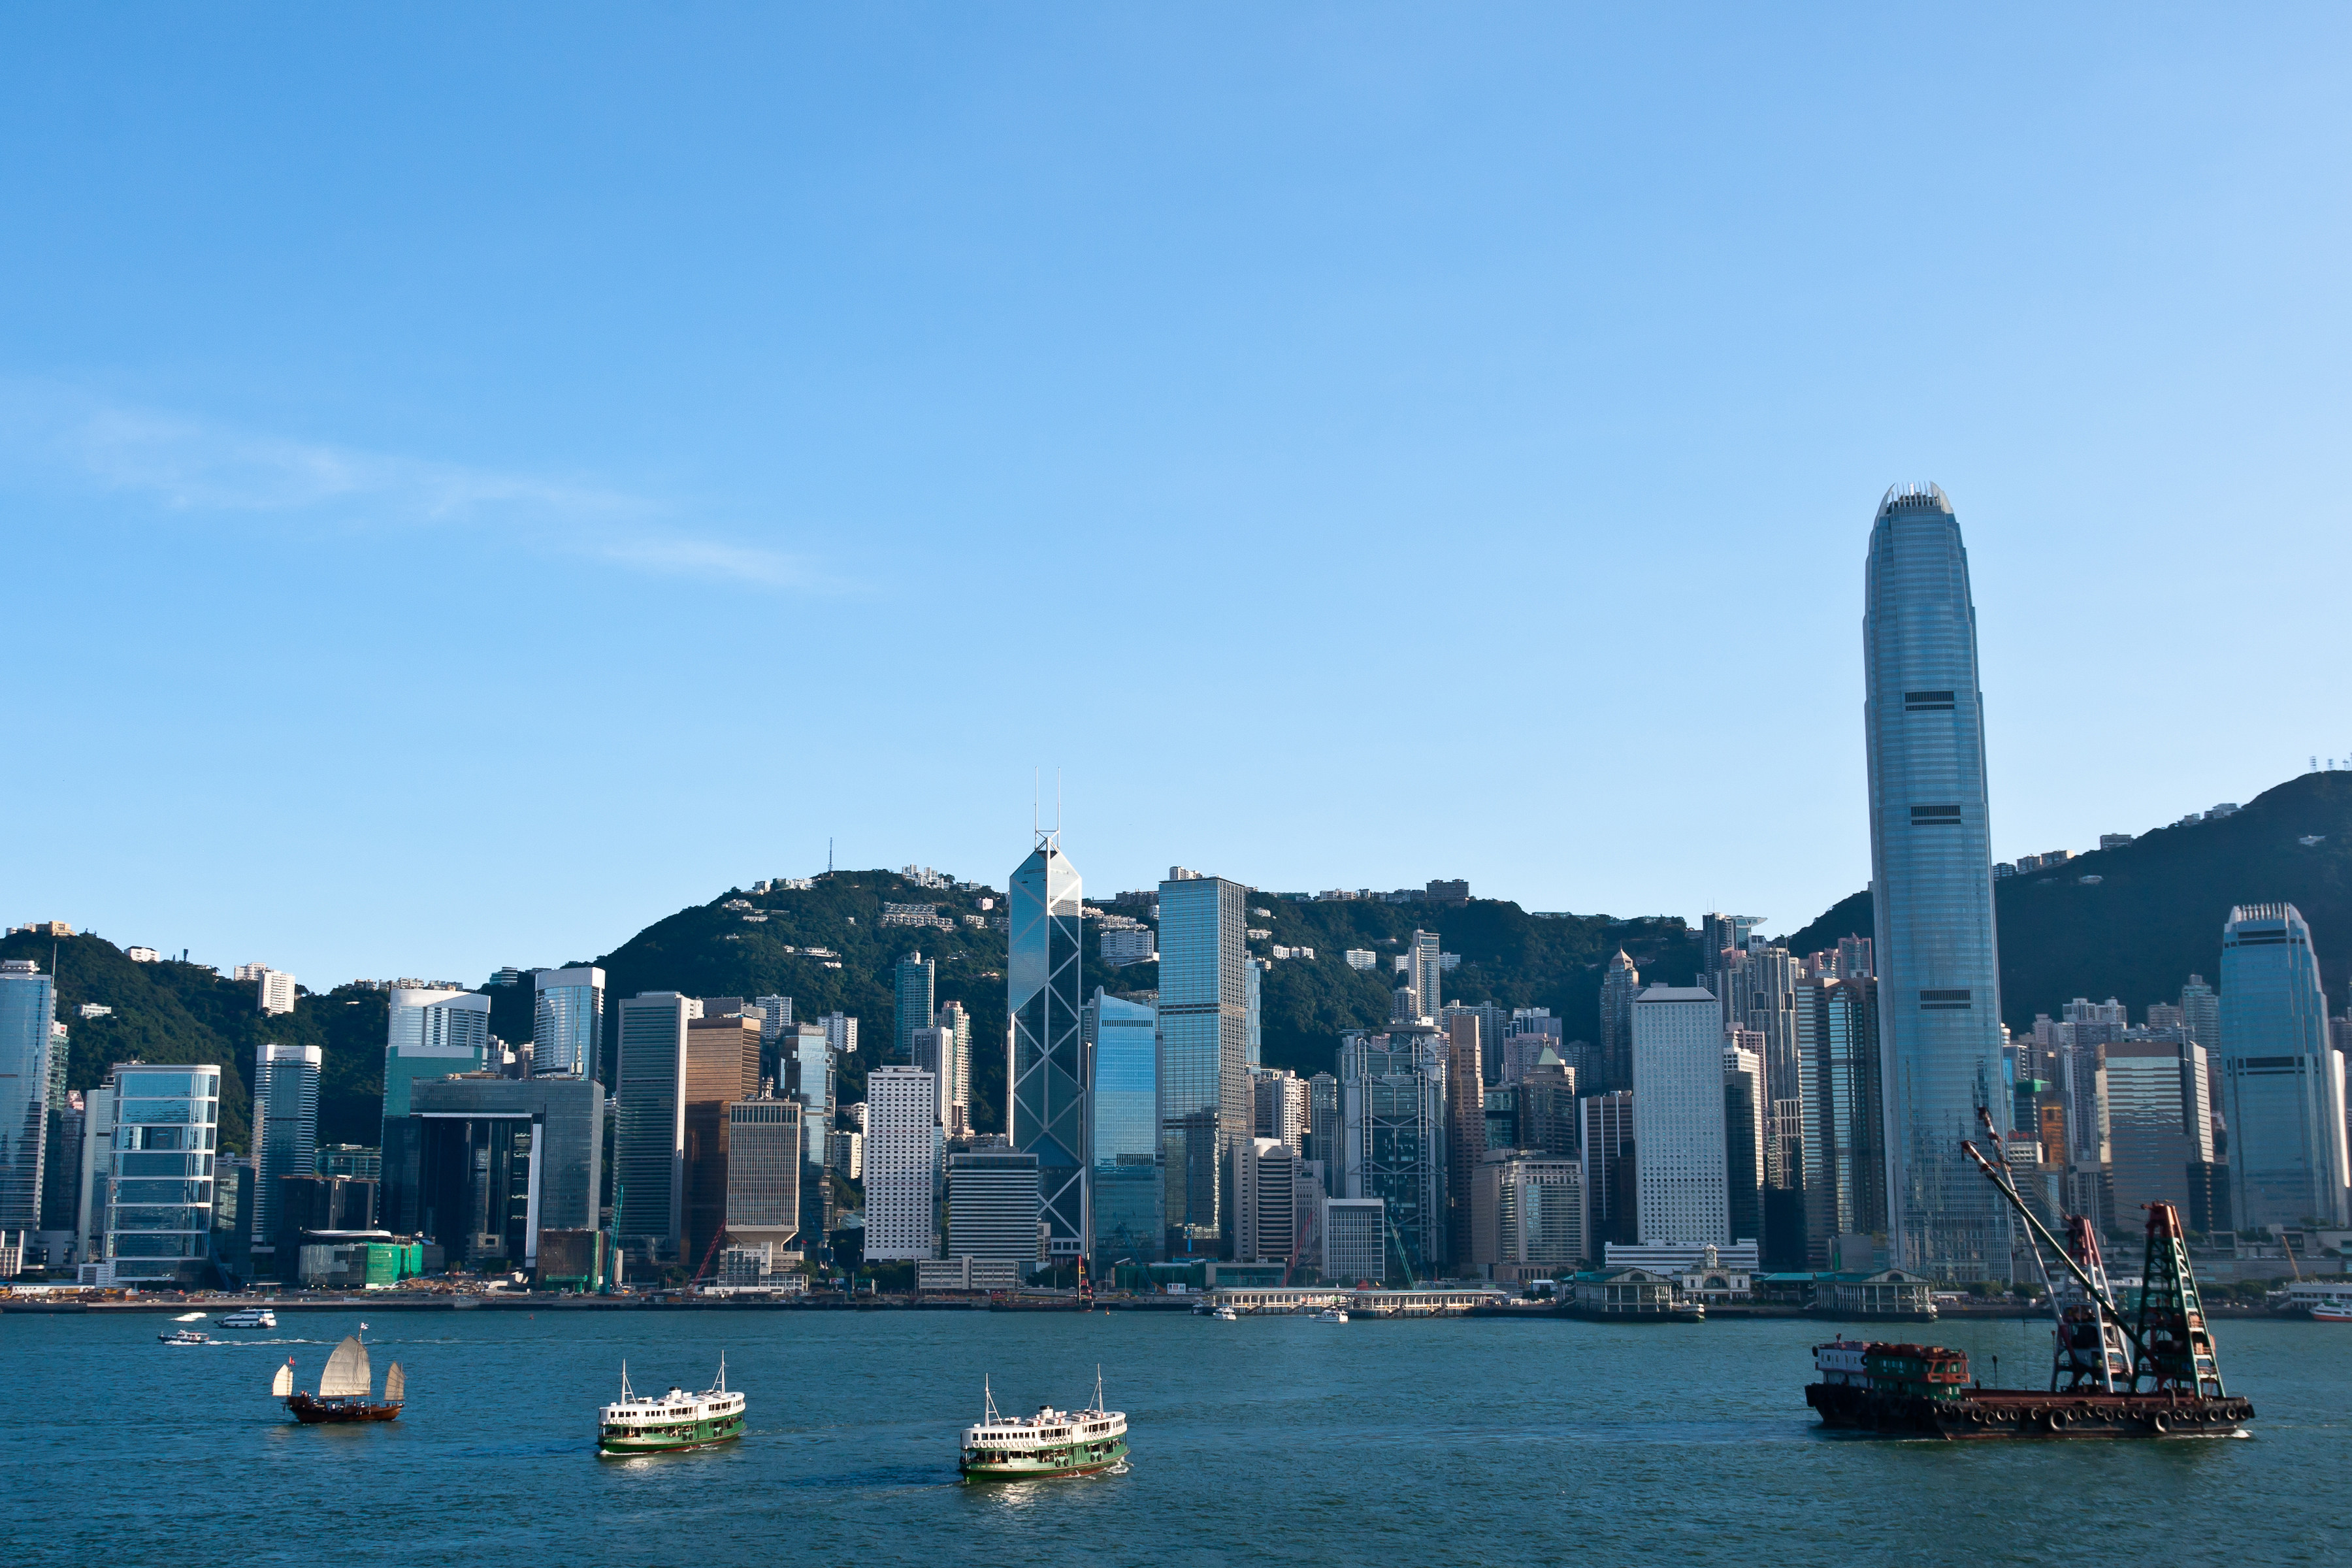 The Hong Kong government has stated its ambition to become a leading green tech and green finance hub. Photo: Shutterstock